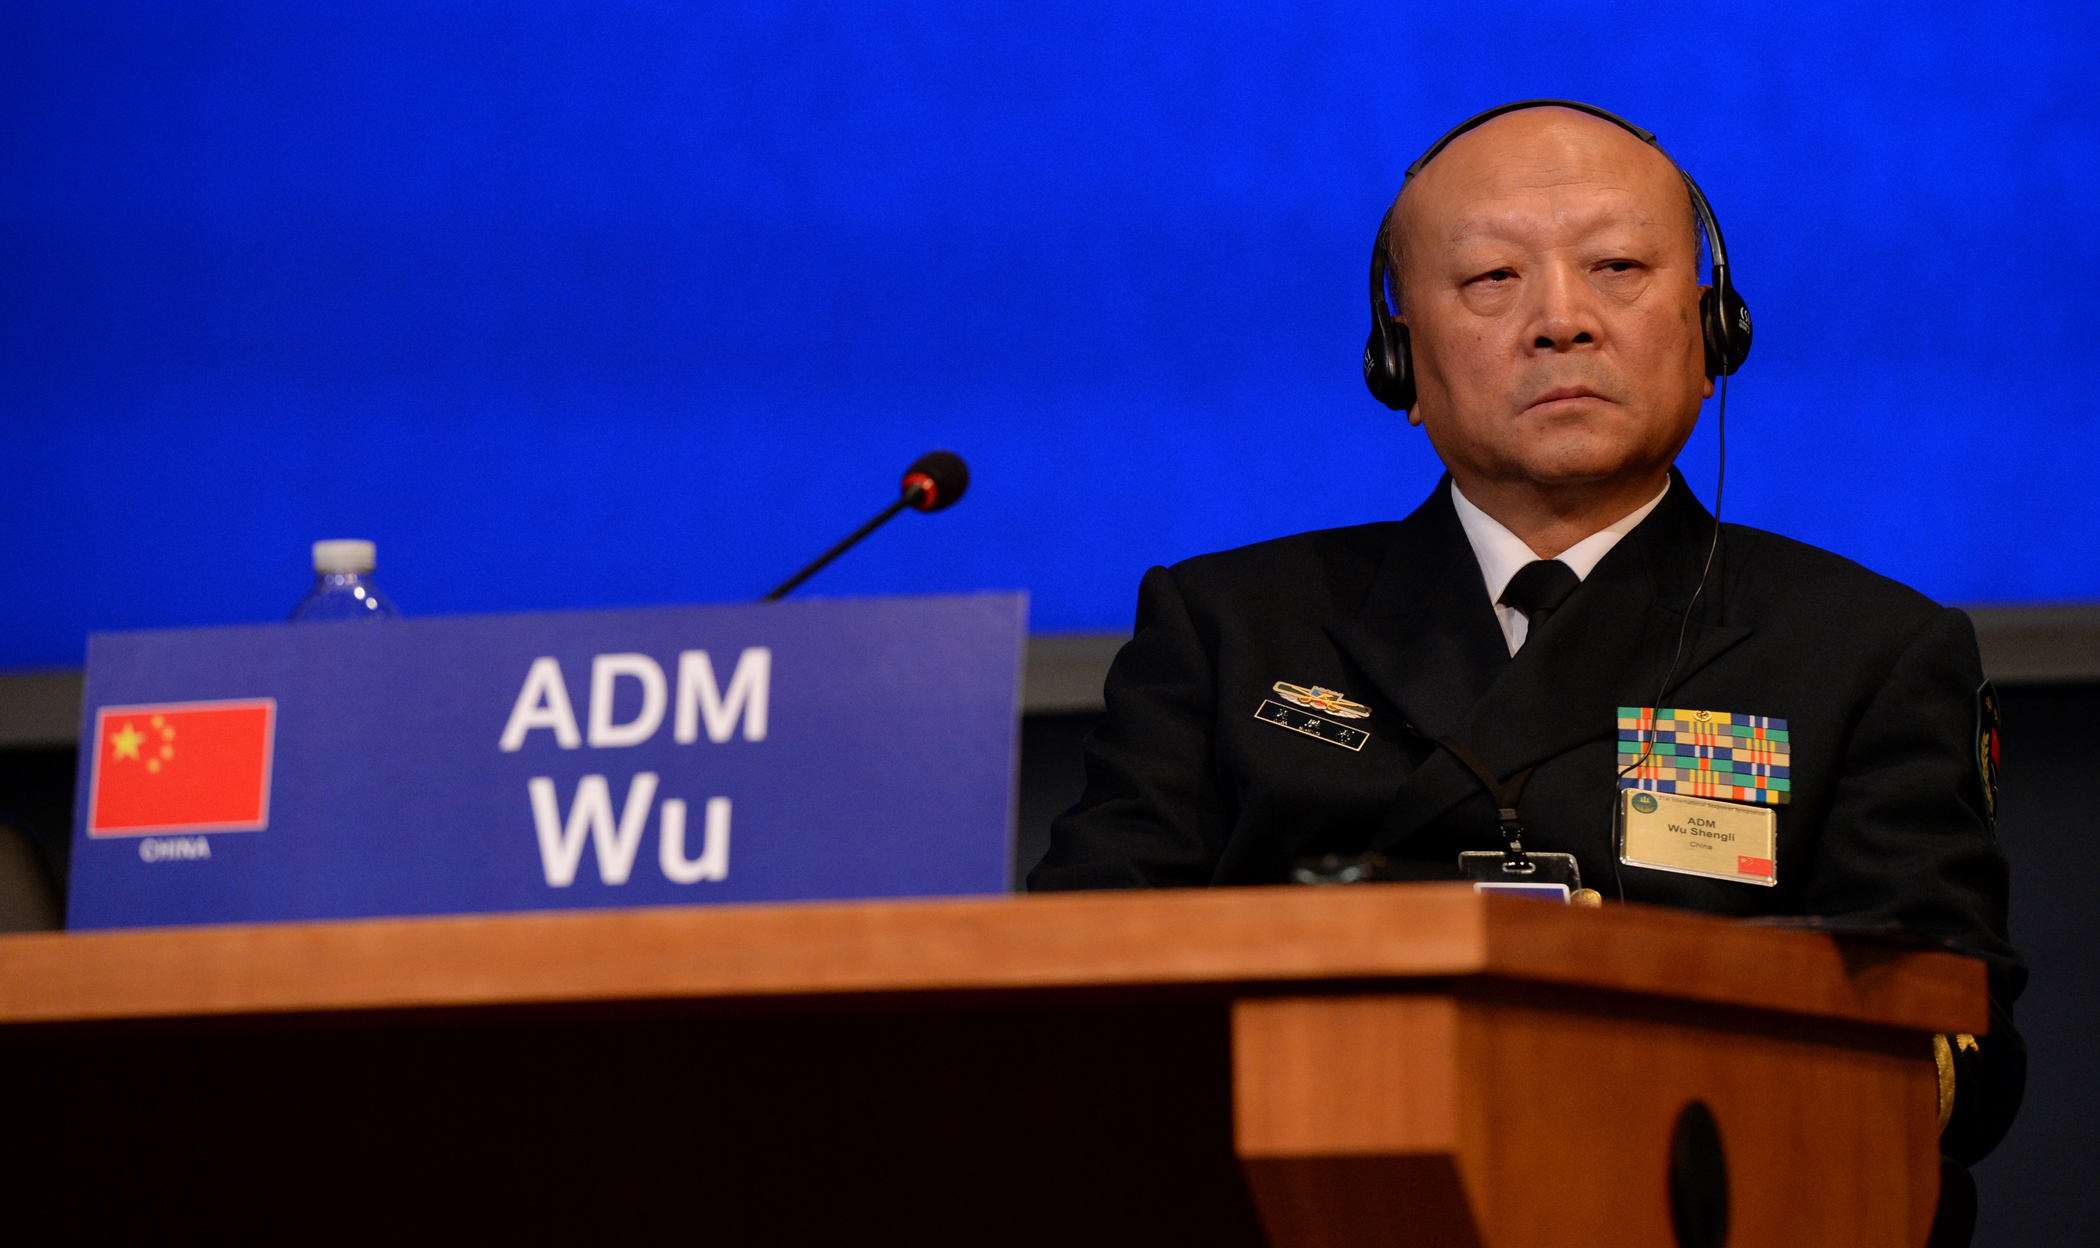 140917-N-PX557-400 NEWPORT, R.I. (Sept. 17, 2014) Commander in Chief of the People's Liberation army navy of the People's Republic of China Adm. Wu Shengli participates in the “Future Trends in Maritime Security” discussion panel during the Chief of Naval Operations’ 21st International Seapower Symposium (ISS) at U.S. Navy War College in Newport, Rhode Island. More than 170 senior officers and civilians from more than 100 countries, including many of the senior-most officers from those countries’ navies, are currently attending the biennial event Sept. 16-19. This year’s theme is “Global Solutions to Common Maritime Challenges,” and will feature guest speakers and three panel discussions to explore shared global concerns: "Future Trends in Maritime Security," "Maritime Implications of Climate Change," and "Enhancing Coalition Operations." First held in 1969, ISS has become the largest gathering of maritime leaders in history and provides a forum for senior international leaders to create and solidify solutions to shared challenges and threats in ways that are in the interests of individual nations. (U.S. Navy photo by Chief Mass Communication Specialist James E. Foehl/Released)